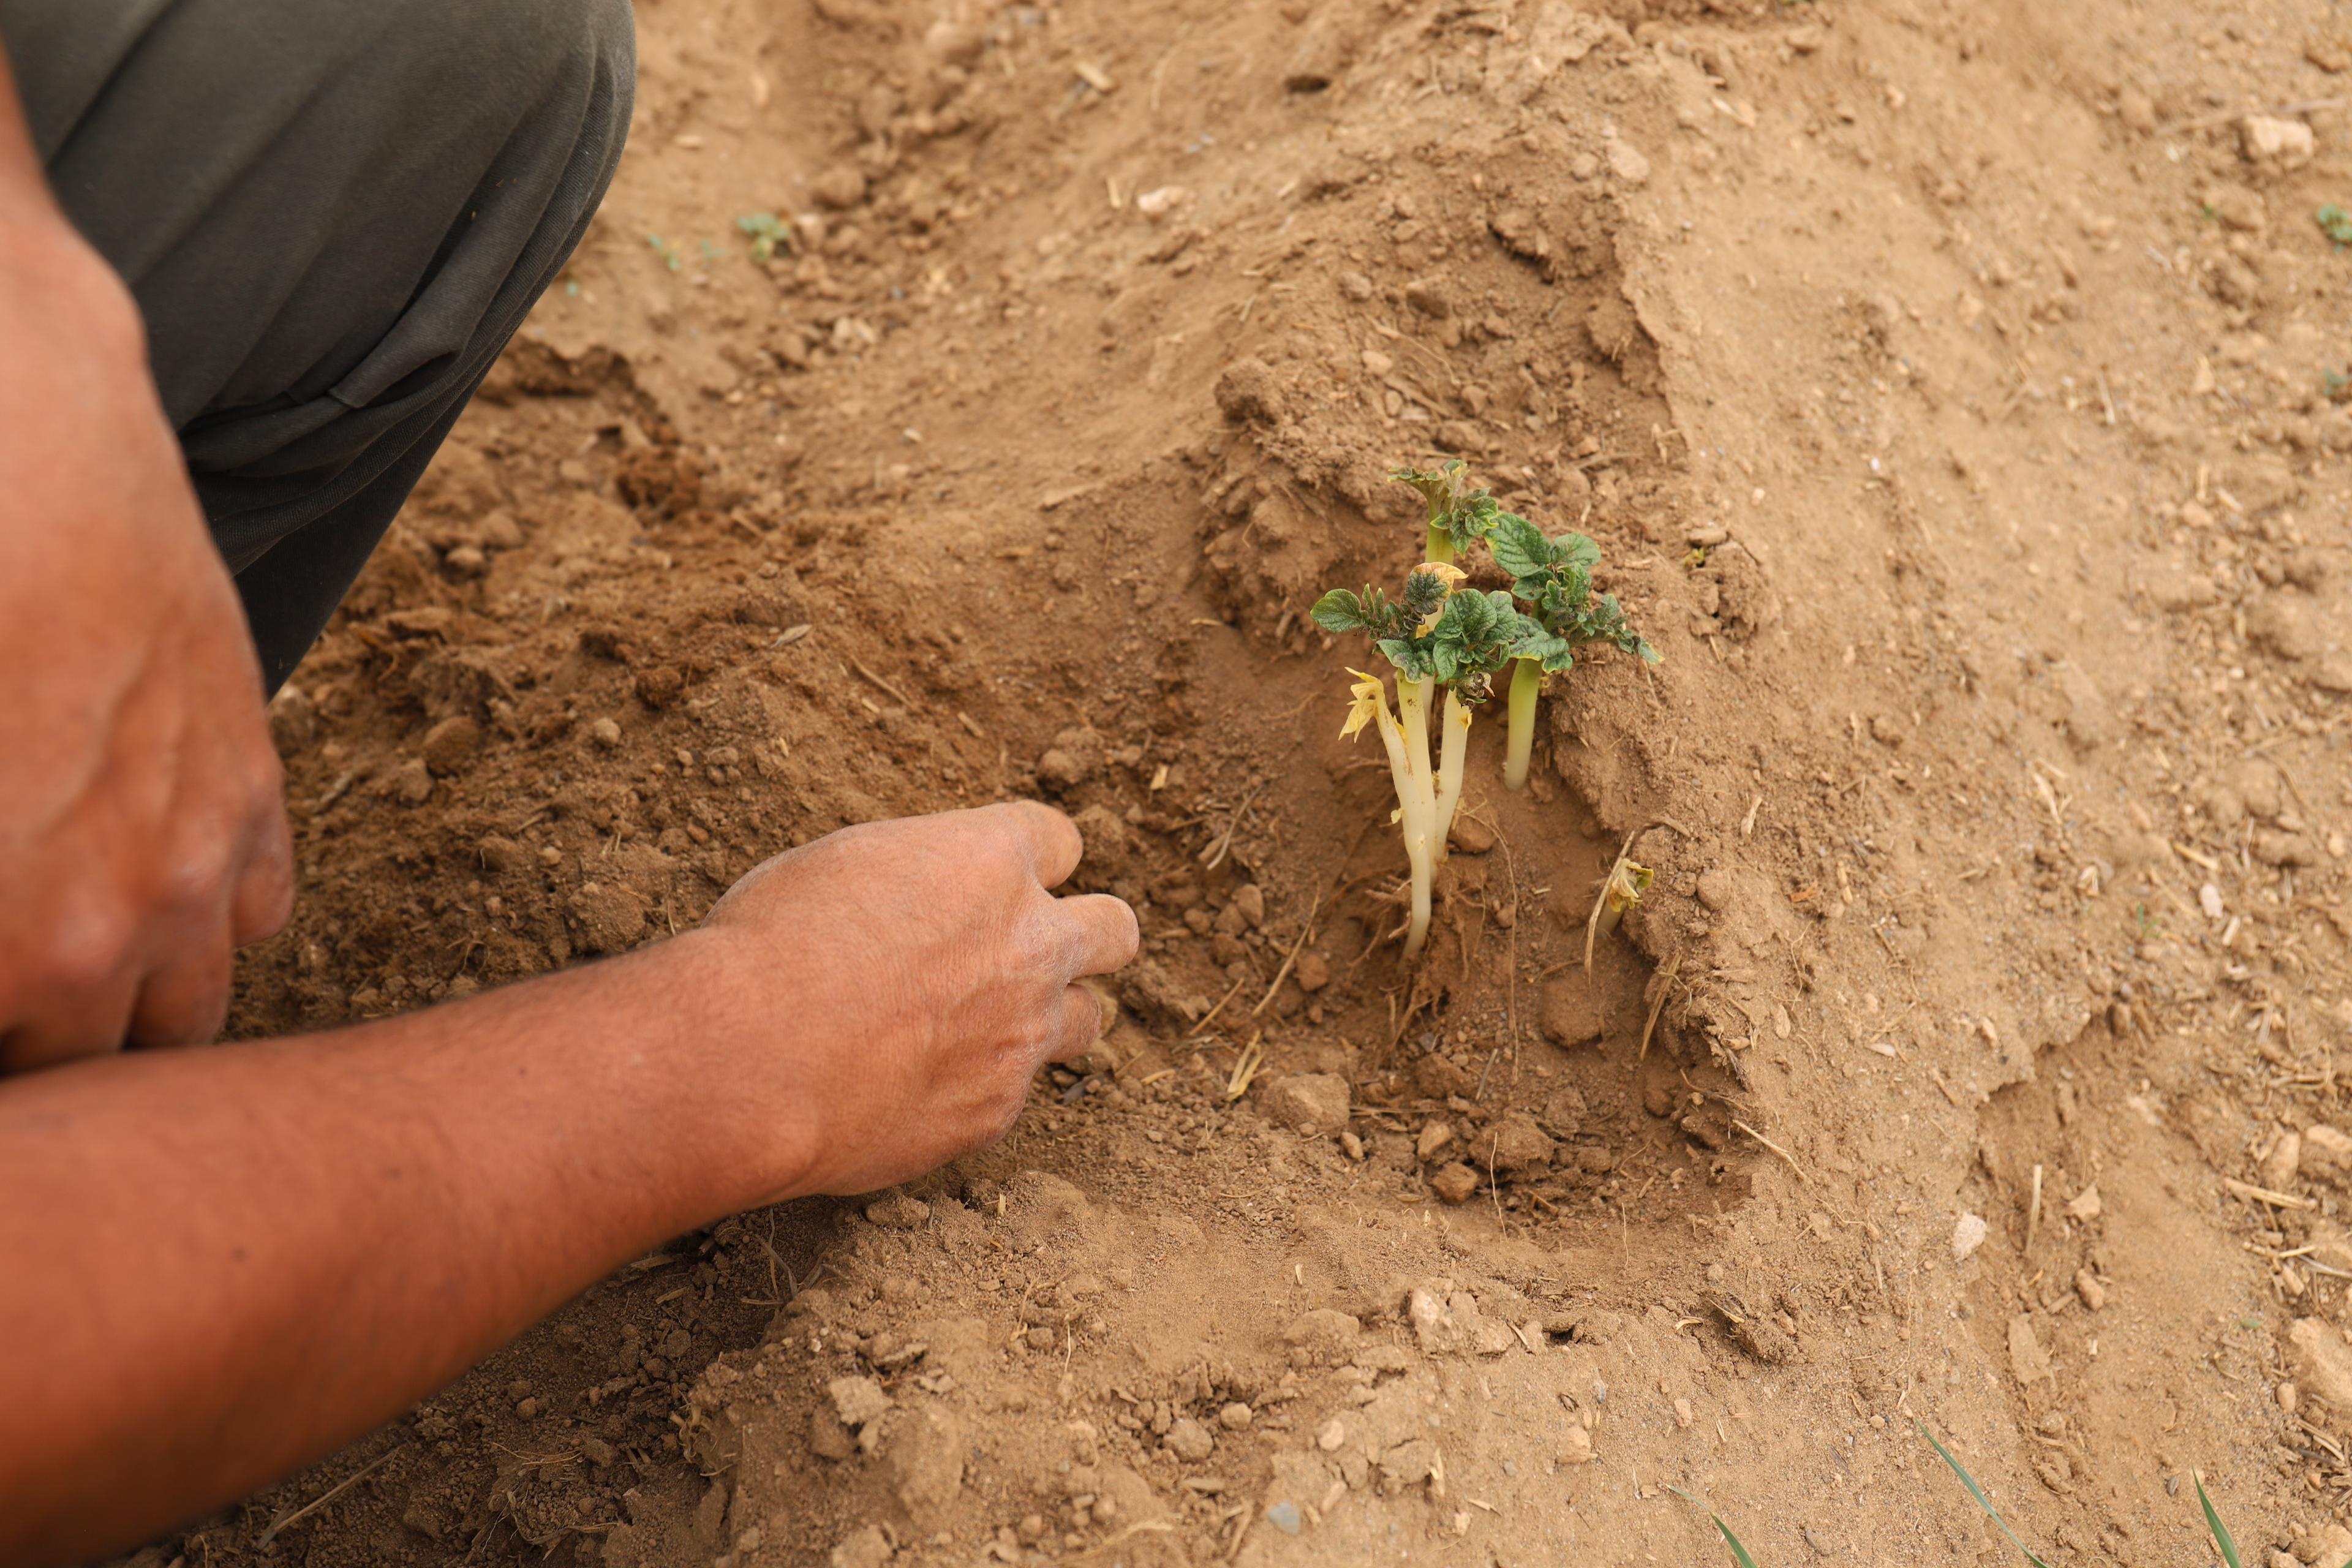 A small potato plant growing out of sandy earth, hands of a person that is out of frame cleaning around it